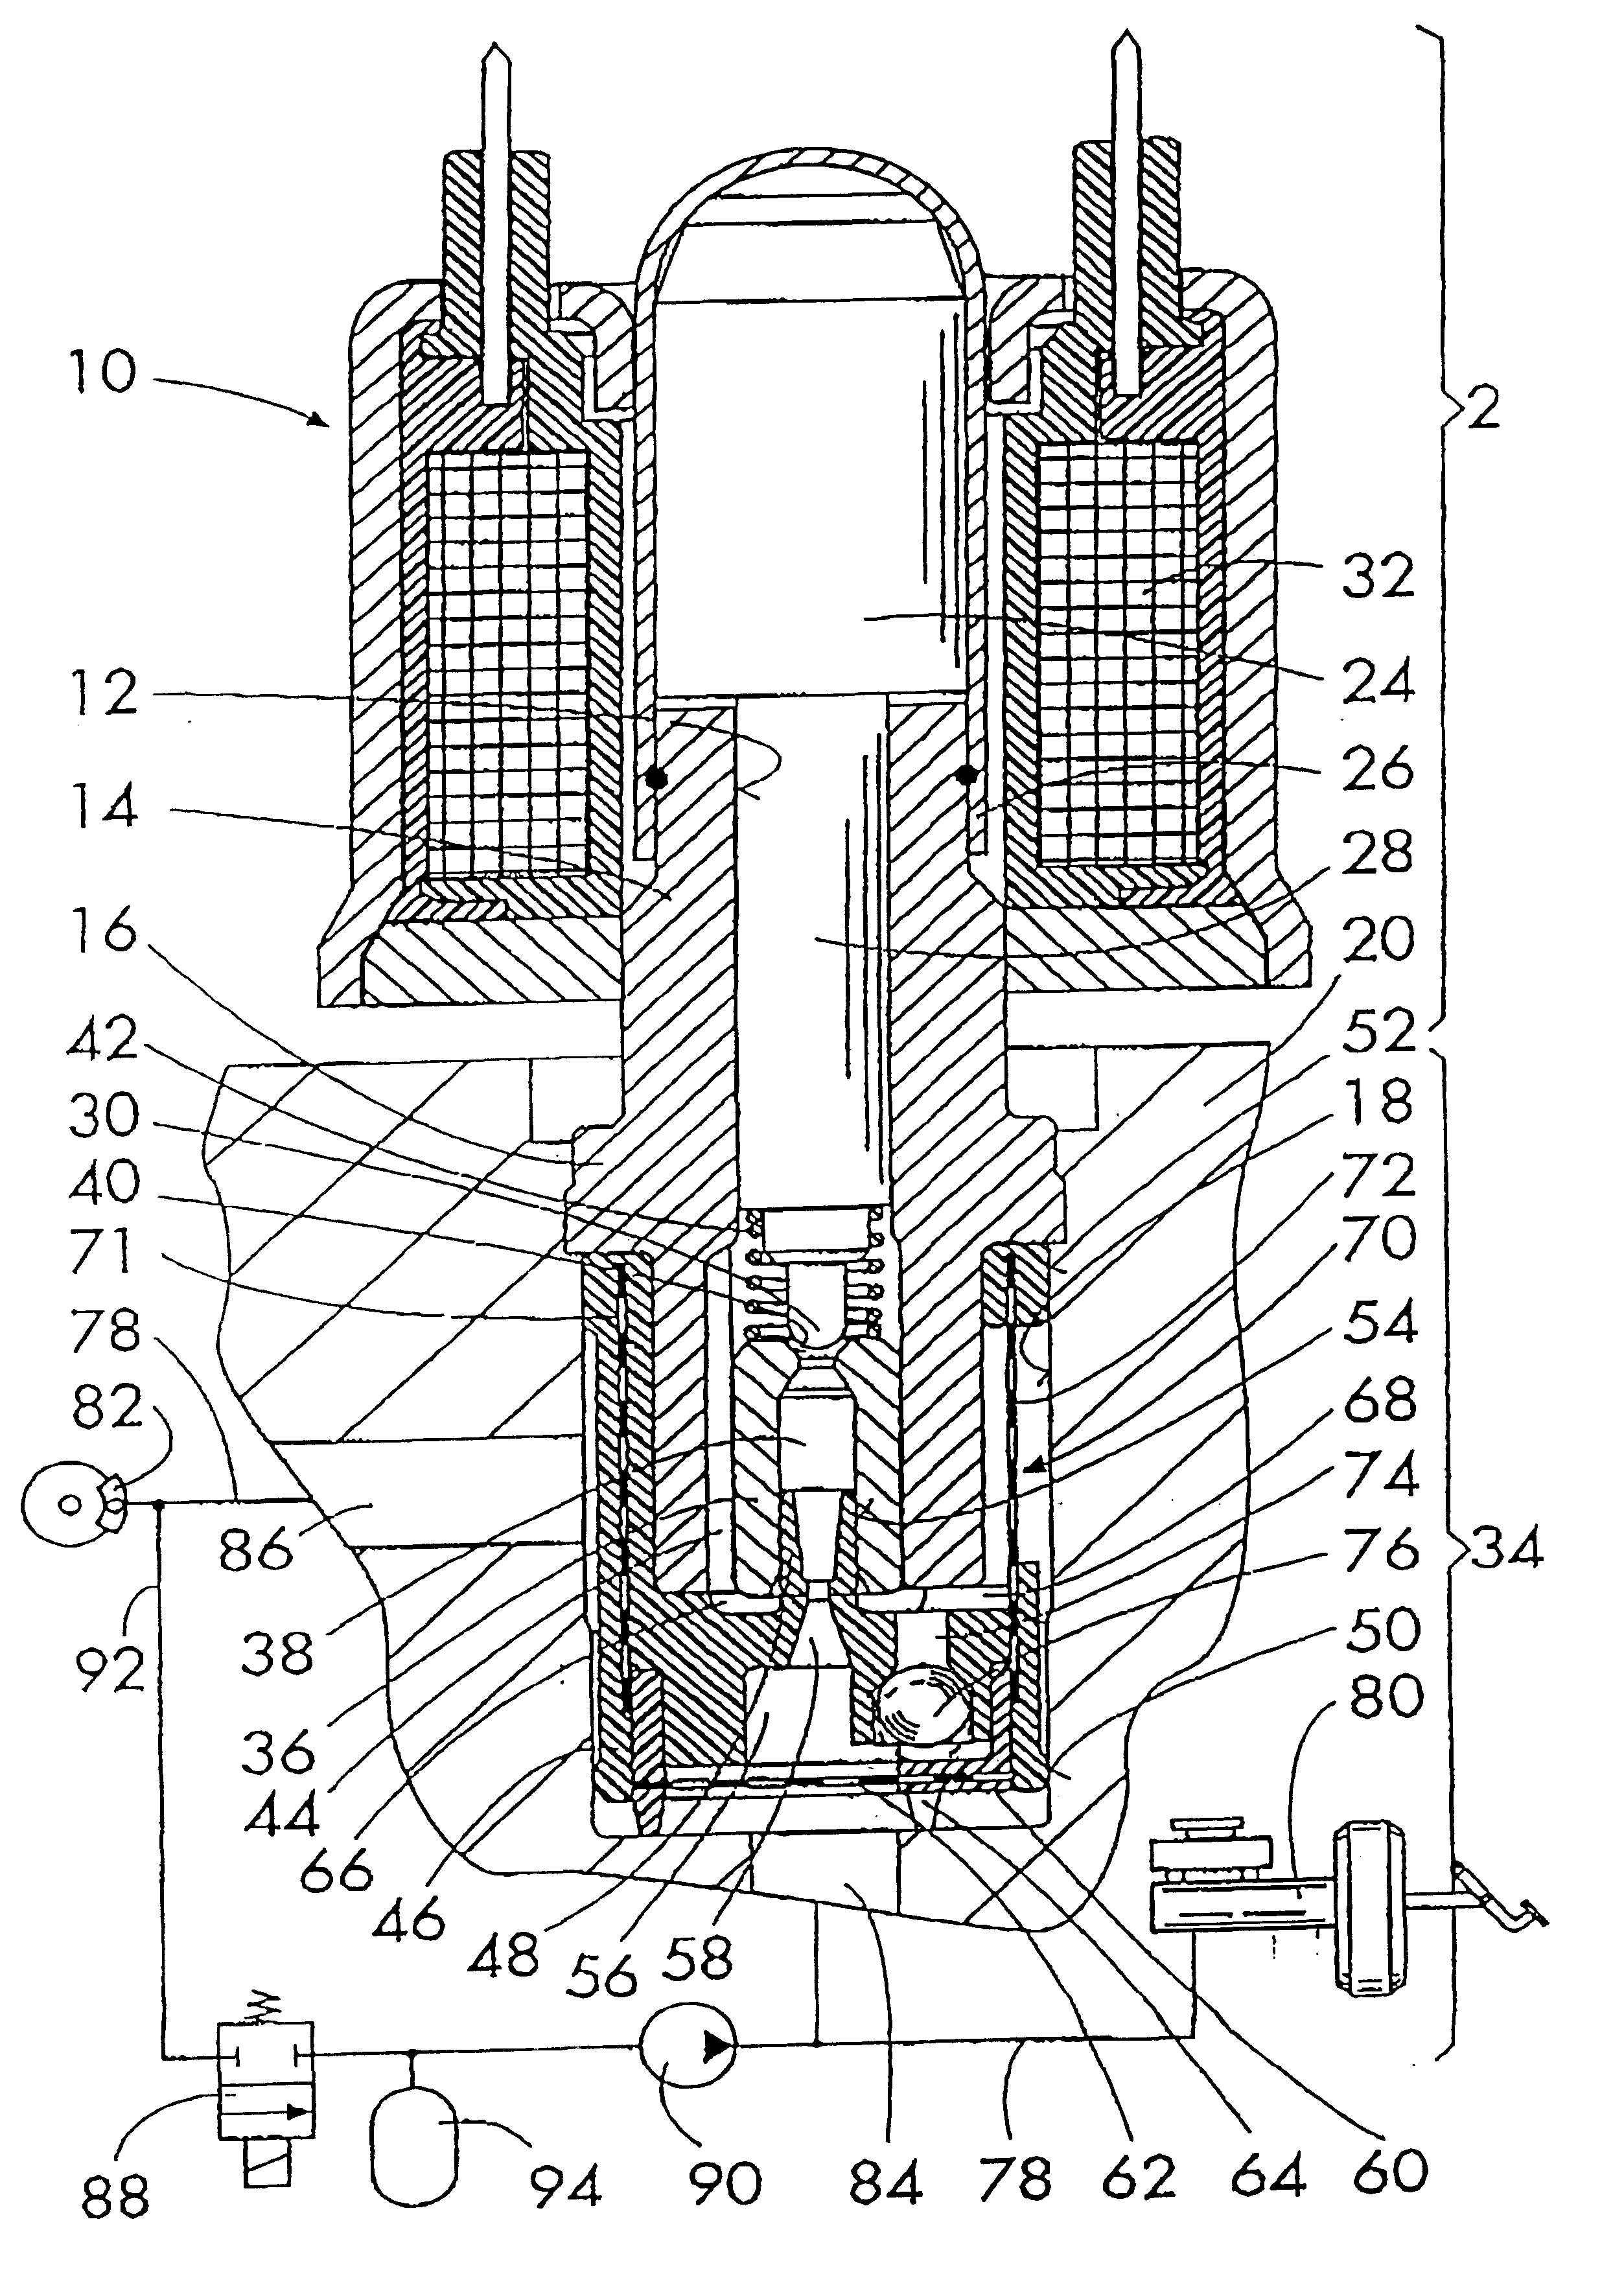 Solenoid valve for a slip-regulated hydraulic brake system of a vehicle